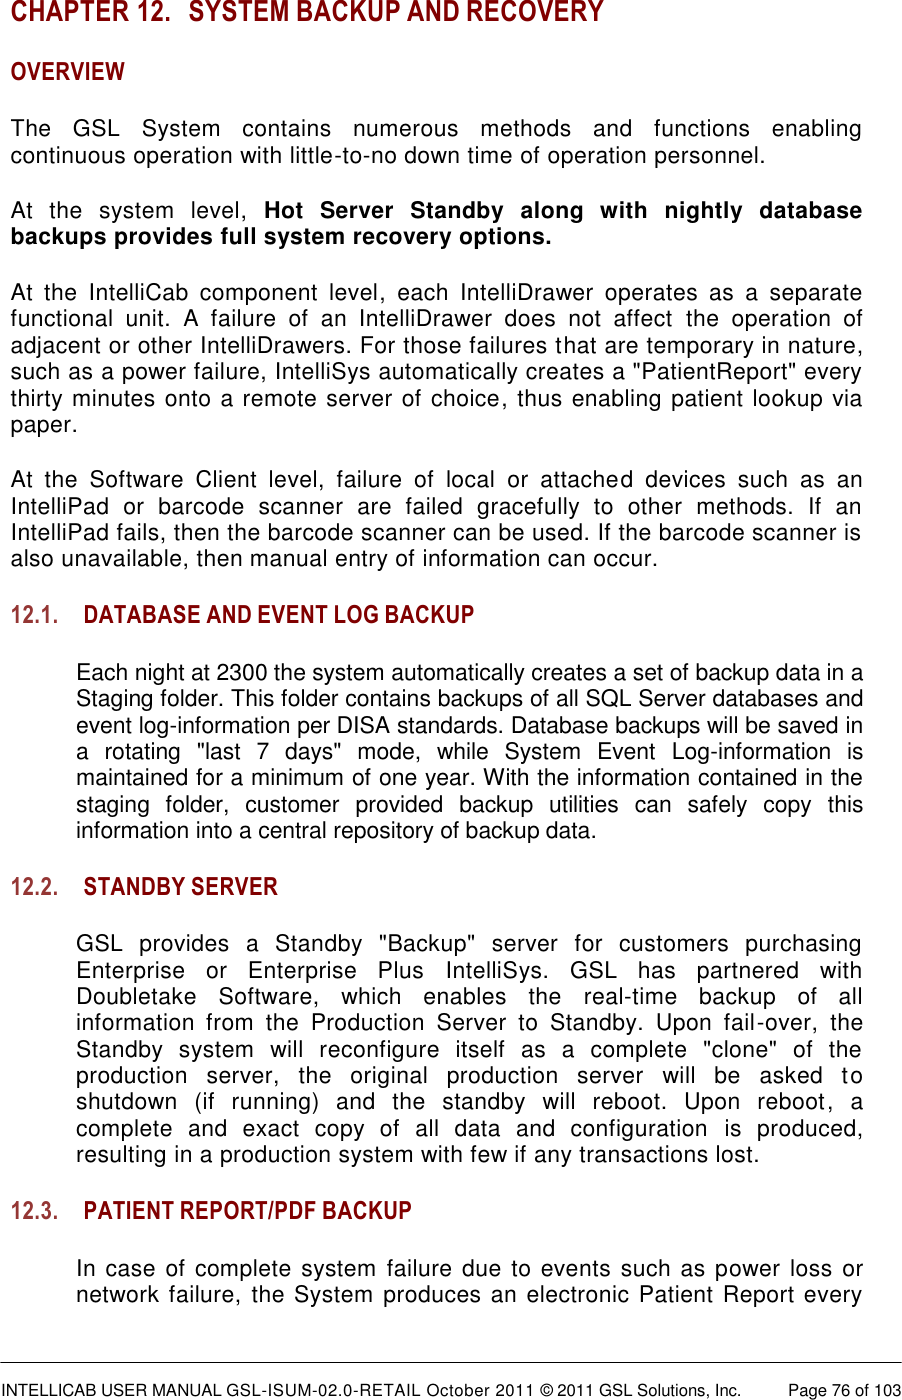  INTELLICAB USER MANUAL GSL-ISUM-02.0-RETAIL October 2011 © 2011 GSL Solutions, Inc.   Page 76 of 103   CHAPTER 12. SYSTEM BACKUP AND RECOVERY OVERVIEW The  GSL  System  contains  numerous  methods  and  functions  enabling continuous operation with little-to-no down time of operation personnel.  At  the  system  level,  Hot  Server  Standby  along  with  nightly  database backups provides full system recovery options.  At  the  IntelliCab  component  level,  each  IntelliDrawer  operates  as  a  separate functional  unit.  A  failure  of  an  IntelliDrawer  does  not  affect  the  operation  of adjacent or other IntelliDrawers. For those failures that are temporary in nature, such as a power failure, IntelliSys automatically creates a &quot;PatientReport&quot; every thirty minutes onto a remote server of choice, thus enabling patient lookup via paper.  At  the  Software  Client  level,  failure  of  local  or  attached  devices  such  as  an IntelliPad  or  barcode  scanner  are  failed  gracefully  to  other  methods.  If  an IntelliPad fails, then the barcode scanner can be used. If the barcode scanner is also unavailable, then manual entry of information can occur. 12.1. DATABASE AND EVENT LOG BACKUP Each night at 2300 the system automatically creates a set of backup data in a Staging folder. This folder contains backups of all SQL Server databases and event log-information per DISA standards. Database backups will be saved in a  rotating  &quot;last  7  days&quot;  mode,  while  System  Event  Log-information  is maintained for a minimum of one year. With the information contained in the staging  folder,  customer  provided  backup  utilities  can  safely  copy  this information into a central repository of backup data. 12.2. STANDBY SERVER GSL  provides  a  Standby  &quot;Backup&quot;  server  for  customers  purchasing Enterprise  or  Enterprise  Plus  IntelliSys.  GSL  has  partnered  with Doubletake  Software,  which  enables  the  real-time  backup  of  all information  from  the  Production  Server  to  Standby.  Upon  fail-over,  the Standby  system  will  reconfigure  itself  as  a  complete  &quot;clone&quot;  of  the production  server,  the  original  production  server  will  be  asked  to shutdown  (if  running)  and  the  standby  will  reboot.  Upon  reboot,  a complete  and  exact  copy  of  all  data  and  configuration  is  produced, resulting in a production system with few if any transactions lost. 12.3. PATIENT REPORT/PDF BACKUP In case of complete system failure due to  events such as power loss or network failure, the System produces an electronic Patient Report every 